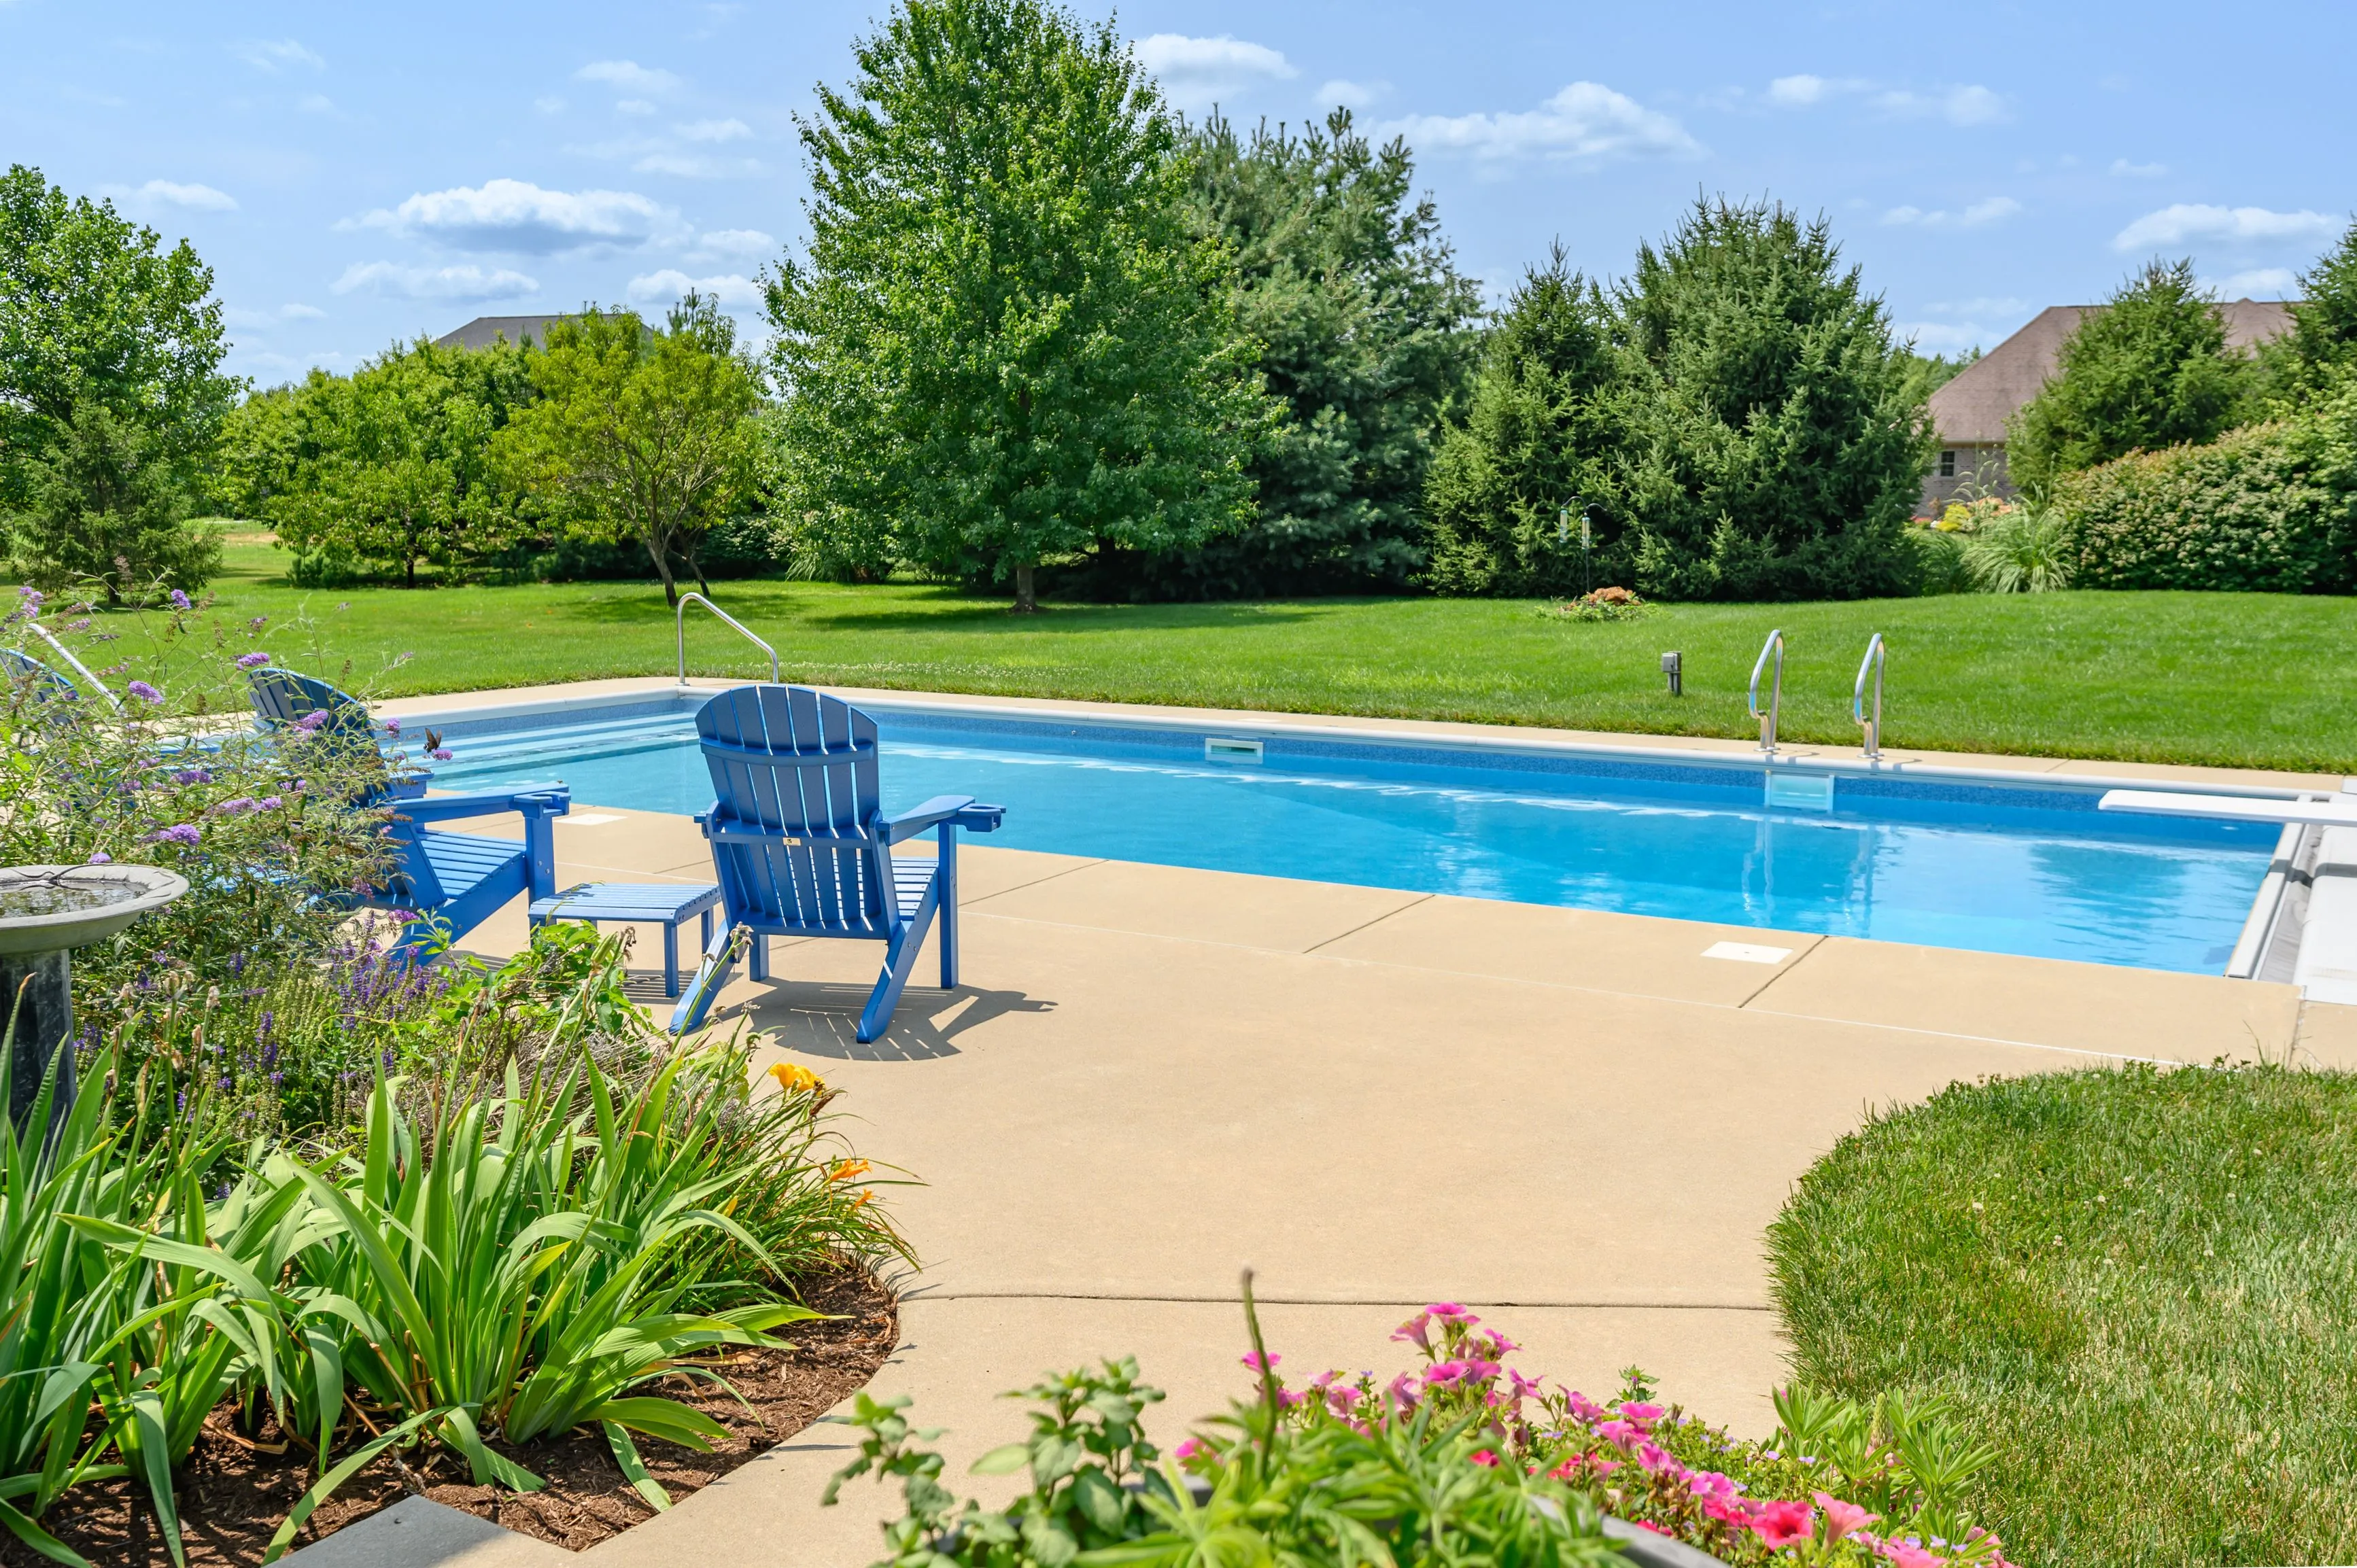 Backyard with an in-ground swimming pool, surrounded by a well-maintained lawn and garden, featuring a lone blue Adirondack chair on the poolside patio.